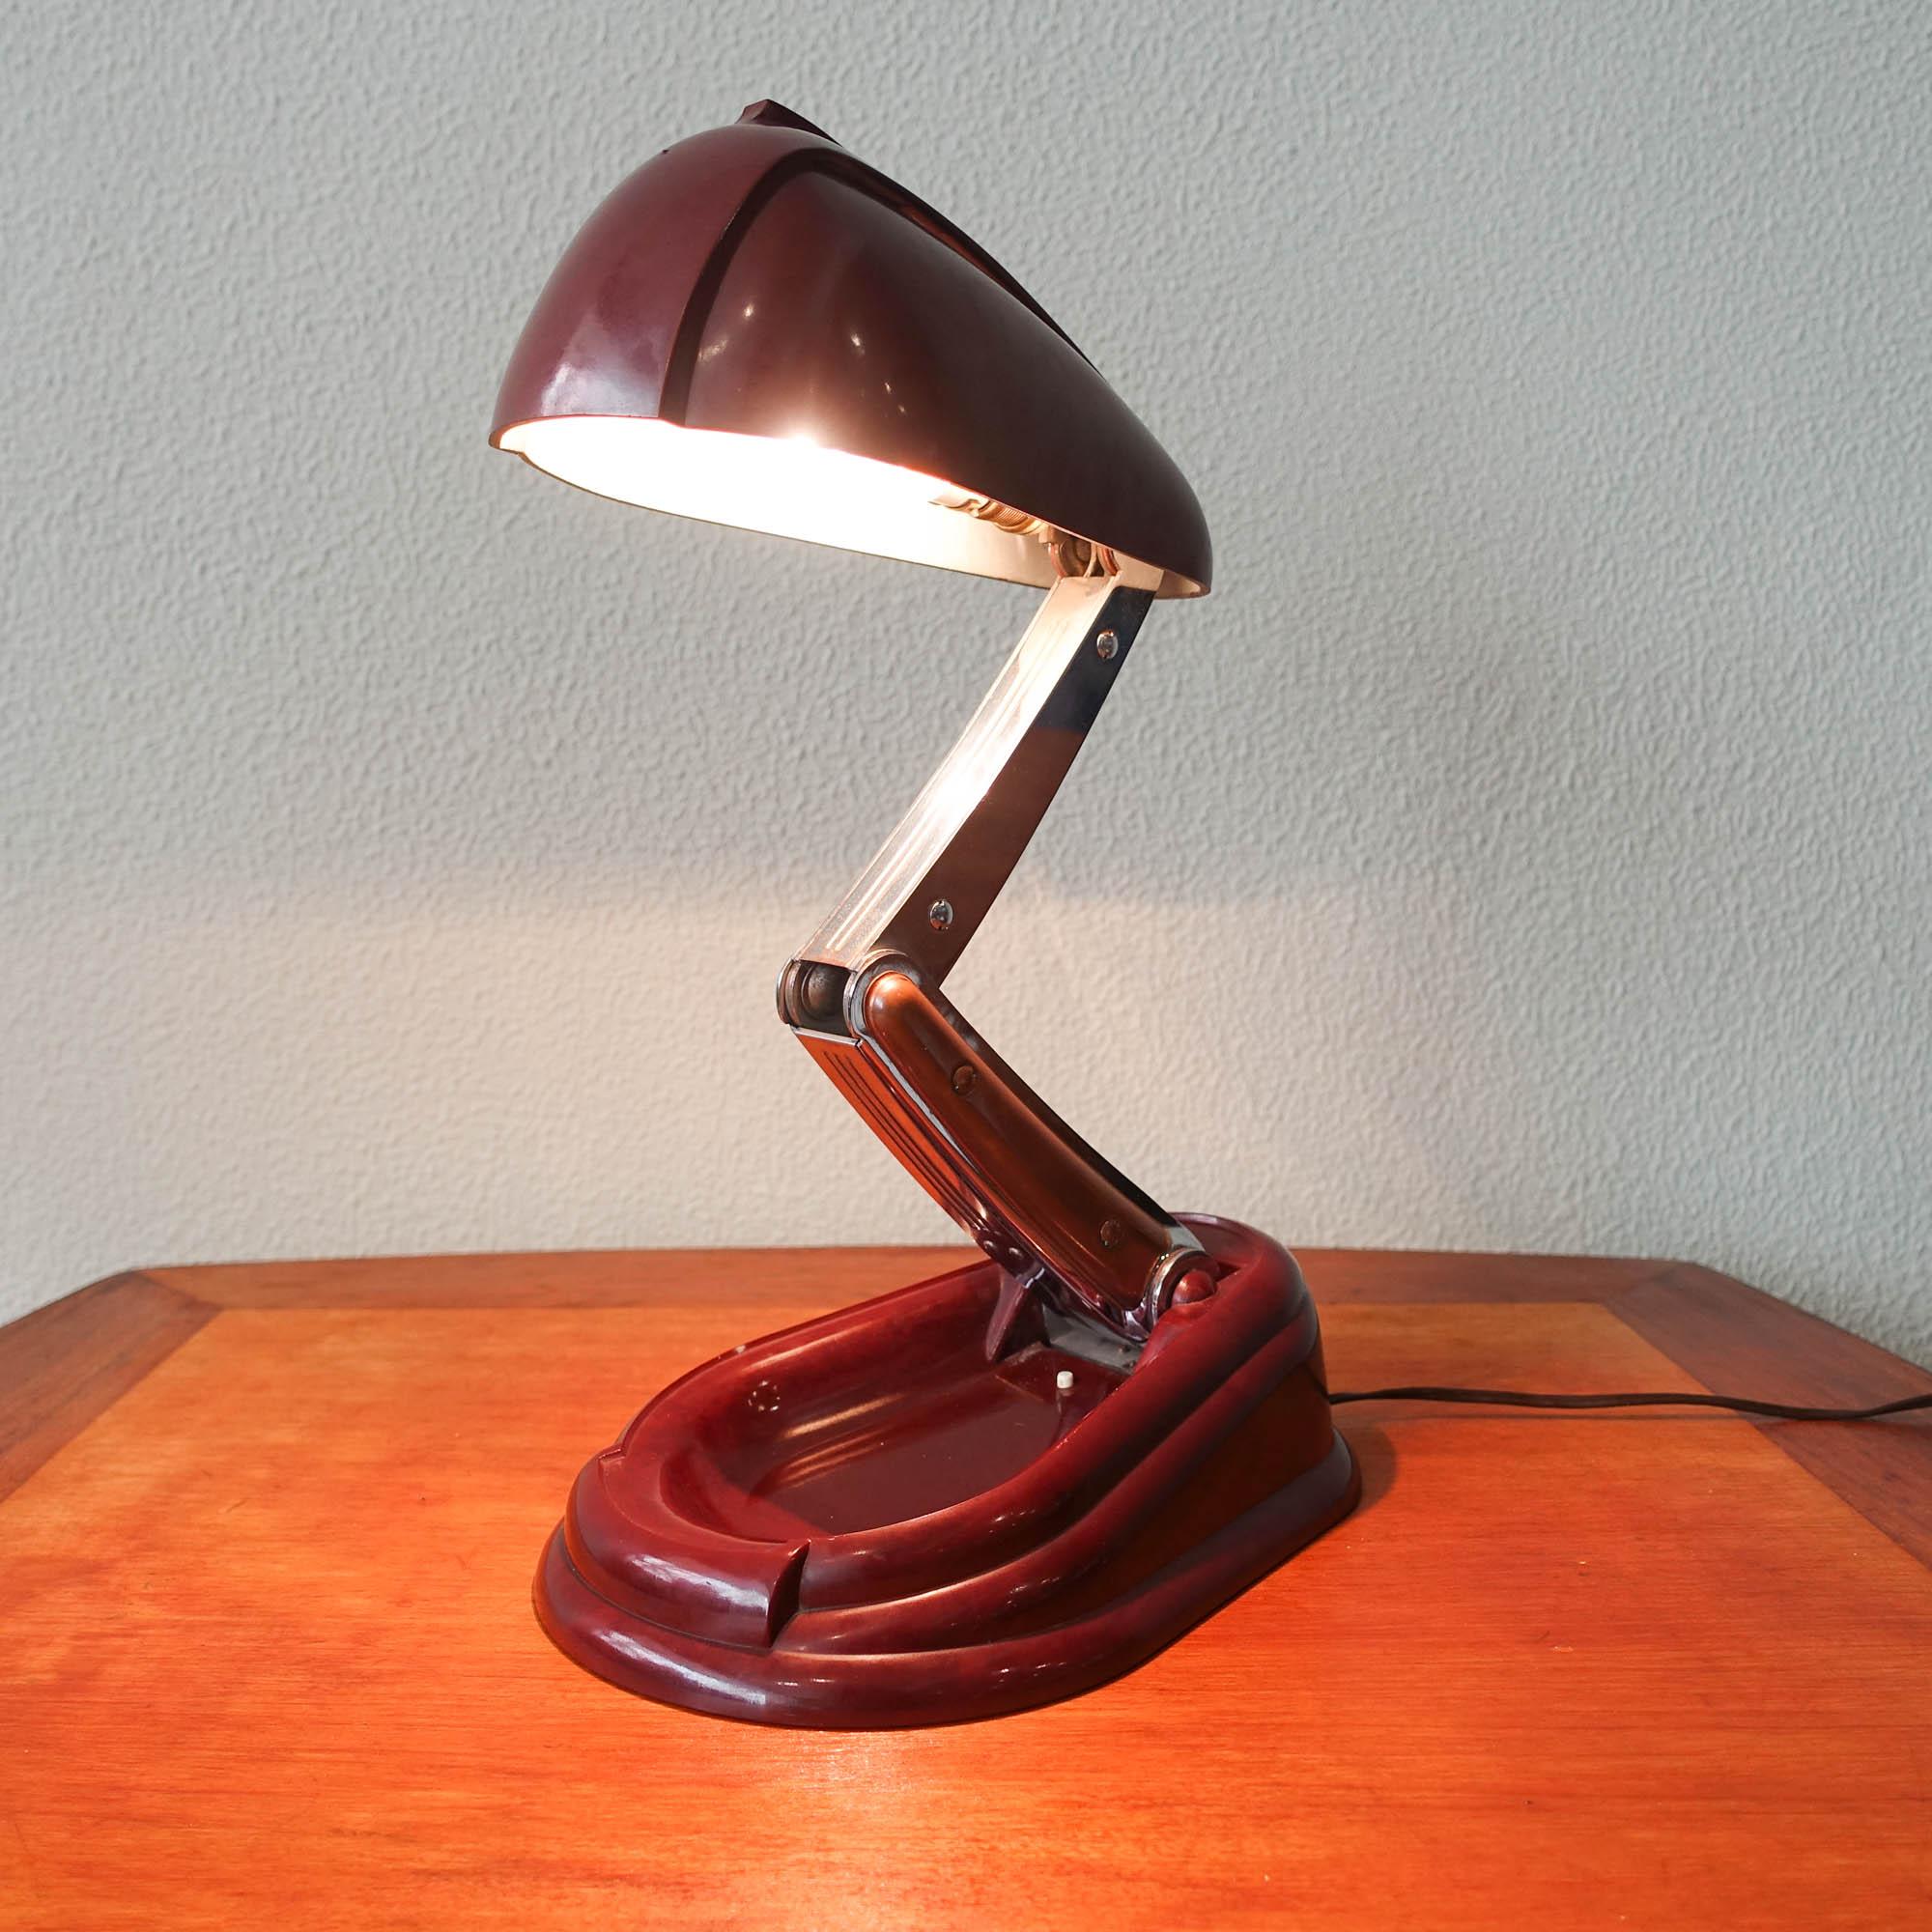 Step back in time to the 1940s with this exquisite table lamp designed and produced by JUMO Brevete in France. Founded by Yves Jujeau and Pierre and André Mounique, the JUMO company was renowned for its innovative designs and high-quality